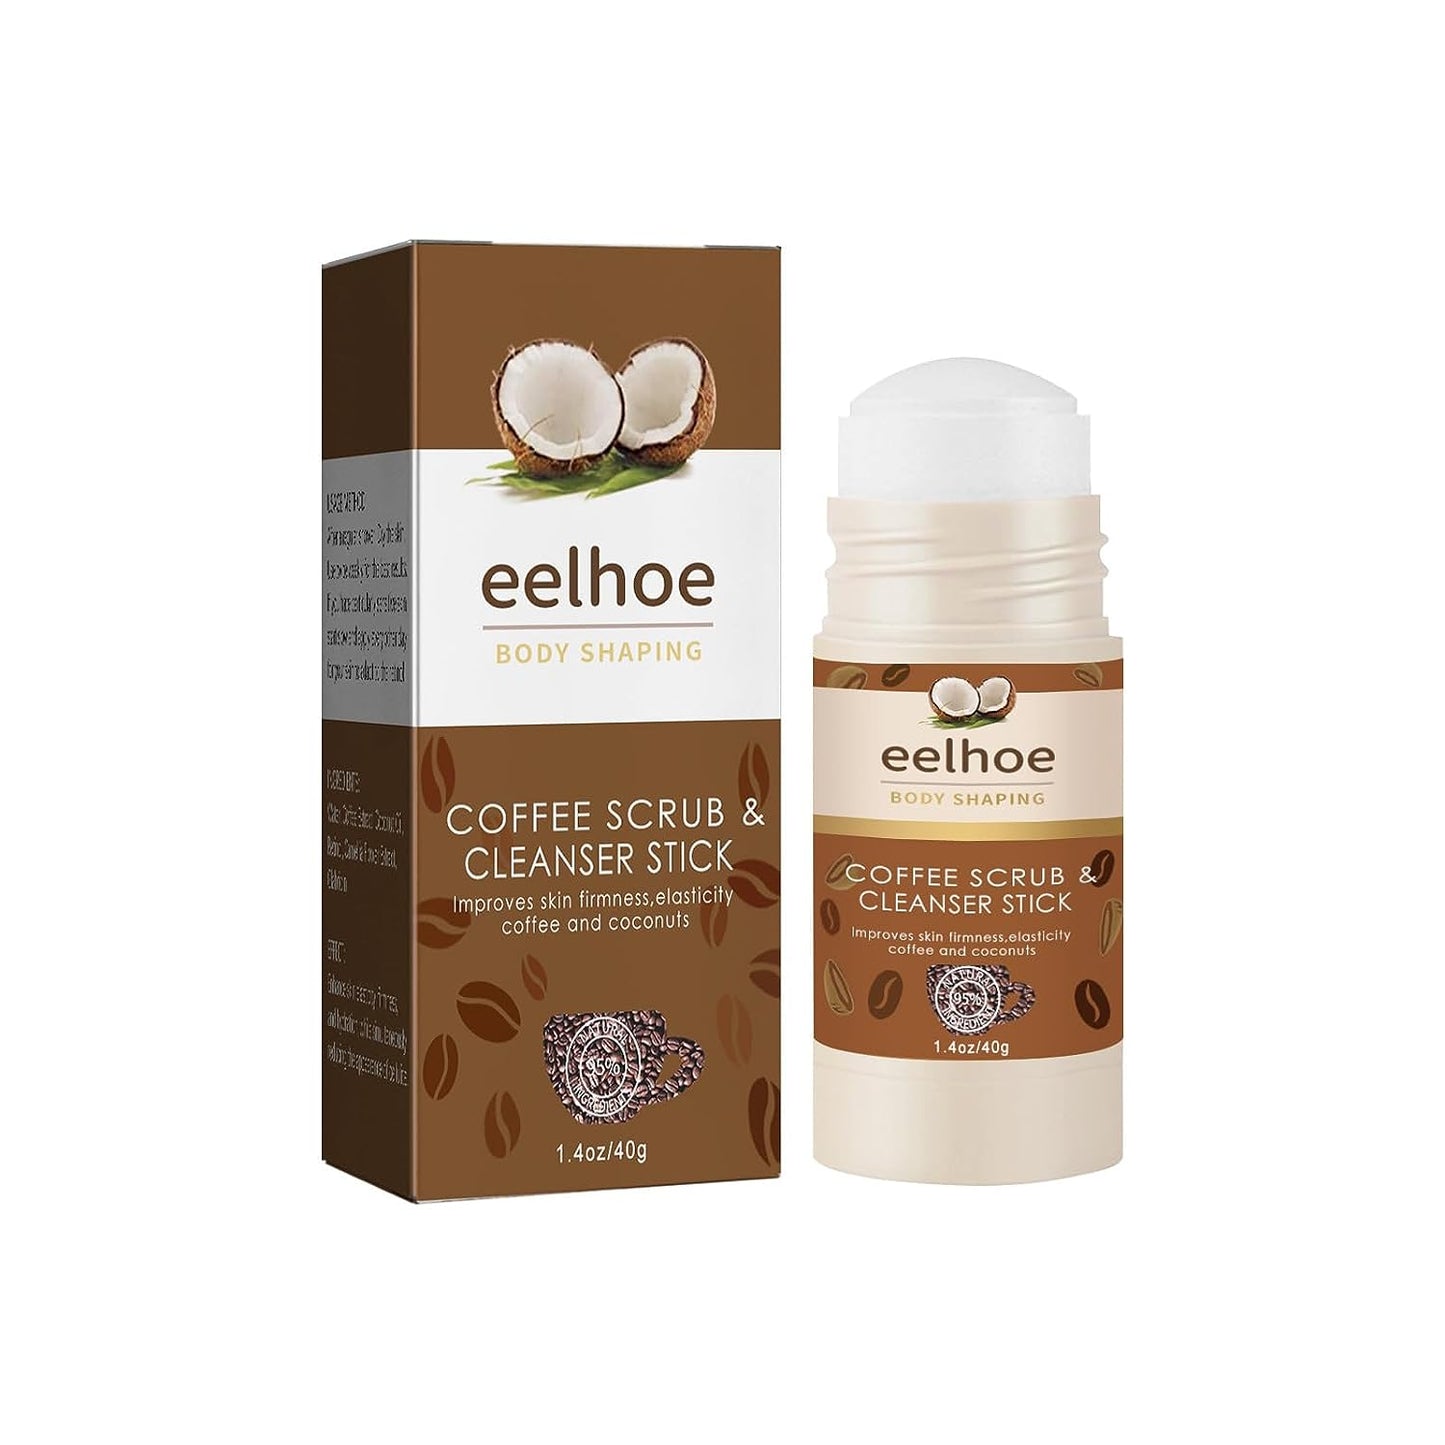 EELHOE ctive Caffeine Remove Swelling Cream - Reduce Swelling, Firm Skin, Natural Ingredients - Perfect for Face & Body